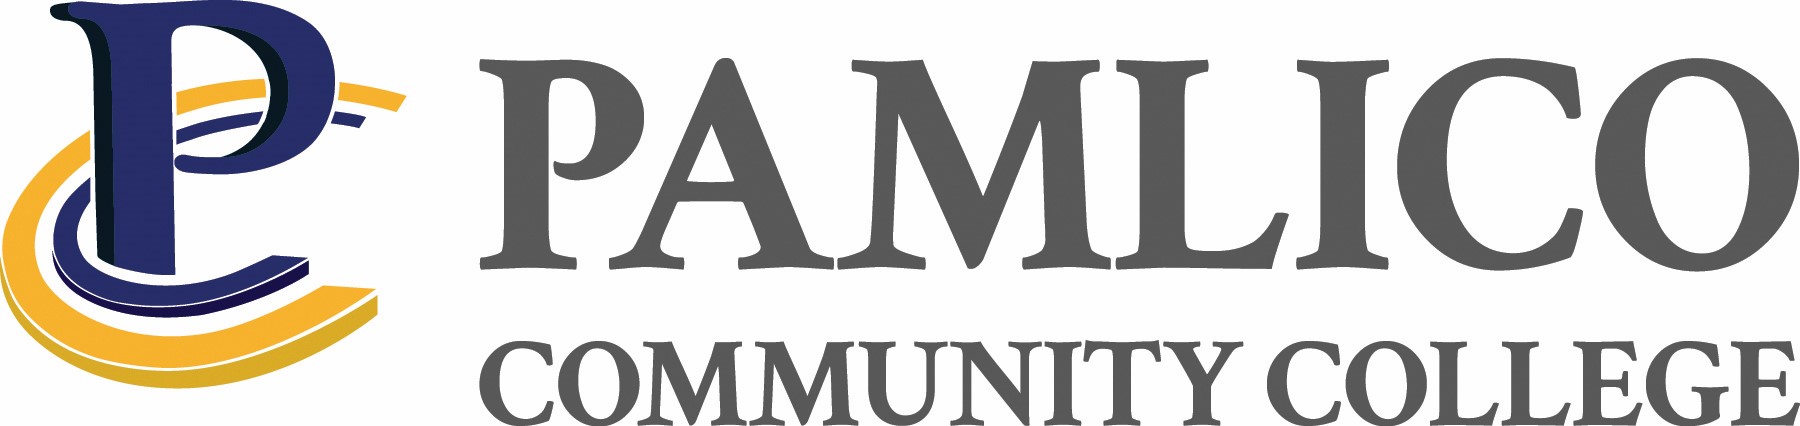 Pamlico Community College Joins STEM East Network